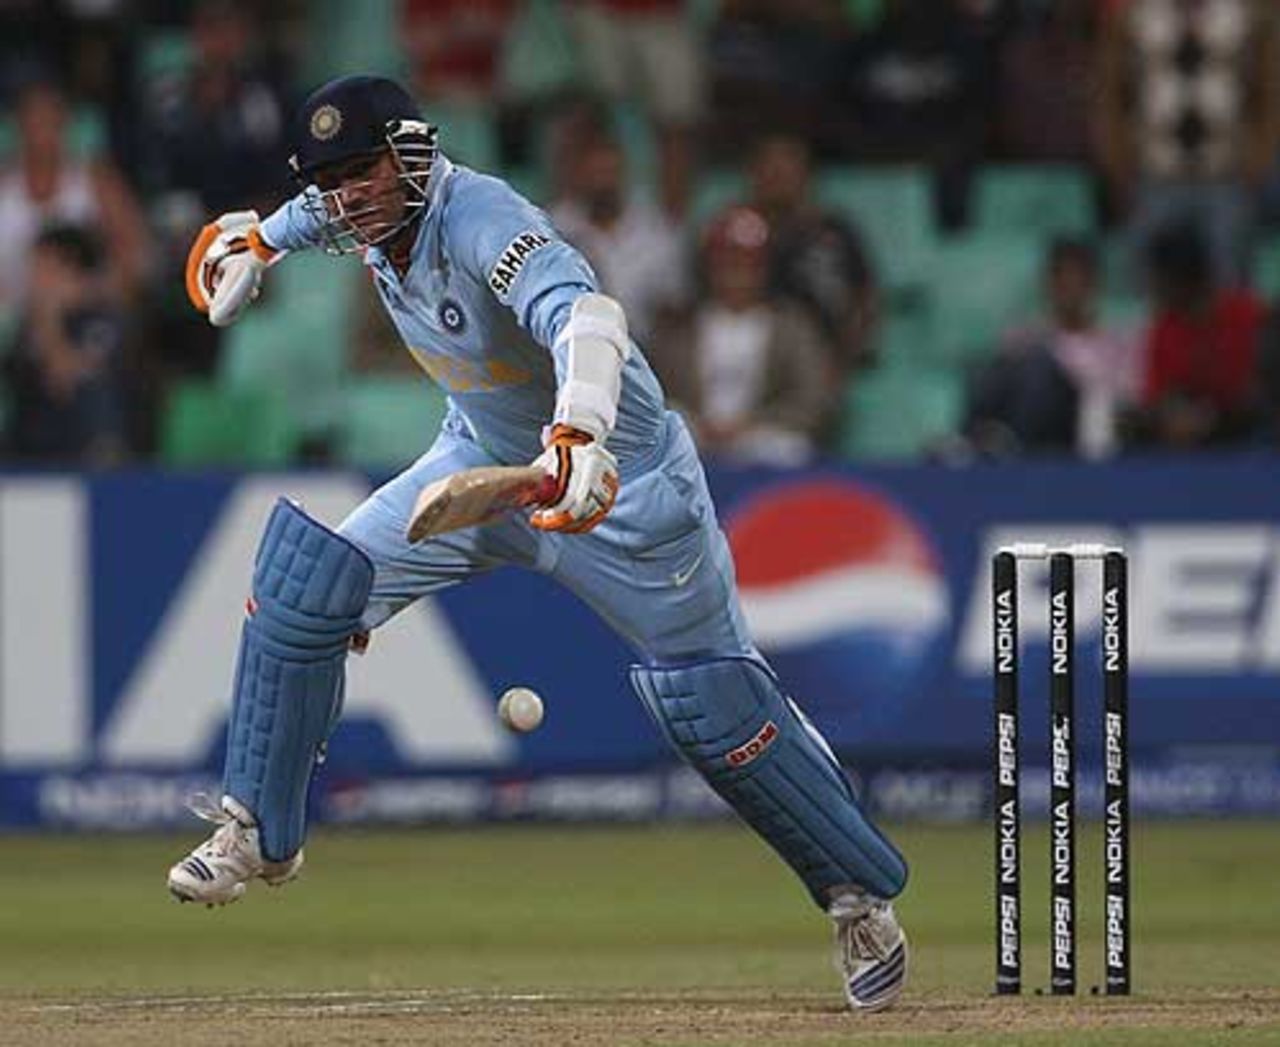 Virender Sehwag hurdles the ball as he goes for a quick single, England v India, Group E, ICC World Twenty20, Durban, September 19, 2007